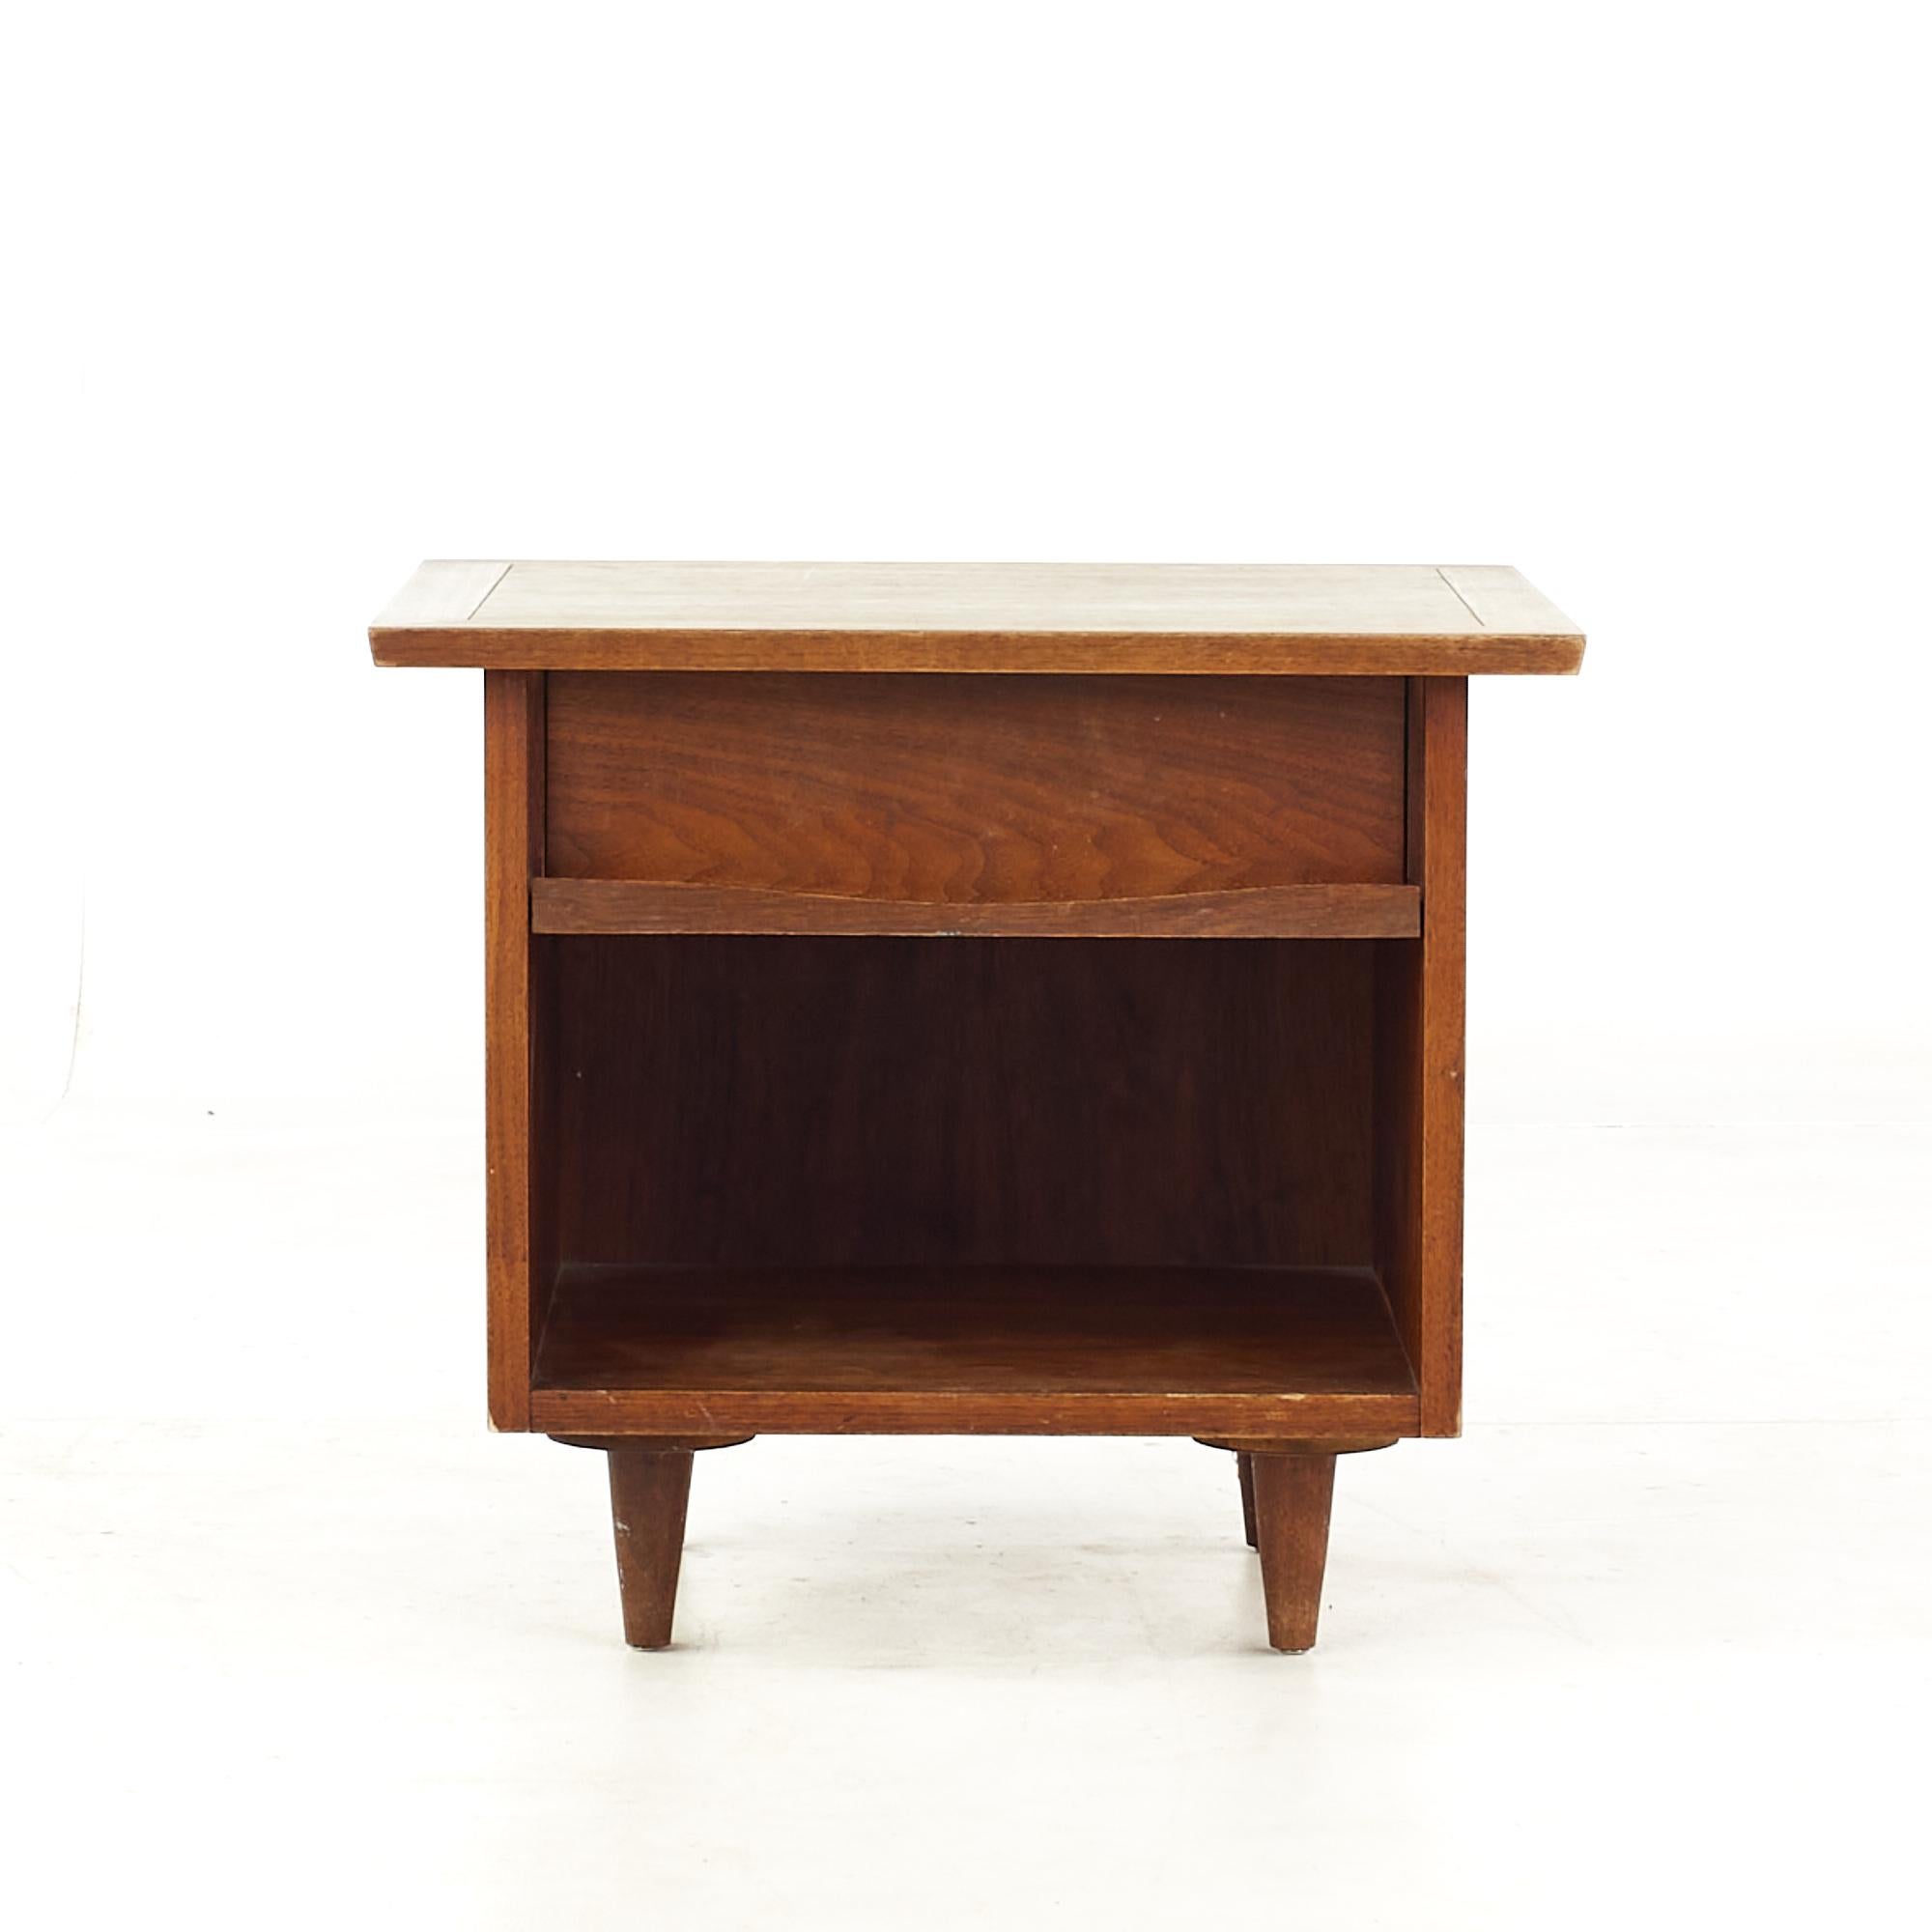 George Nakashima for Widdicomb mid century nightstand

This nightstand measures: 22 wide x 20 deep x 19.5 inches high

All pieces of furniture can be had in what we call restored vintage condition. That means the piece is restored upon purchase